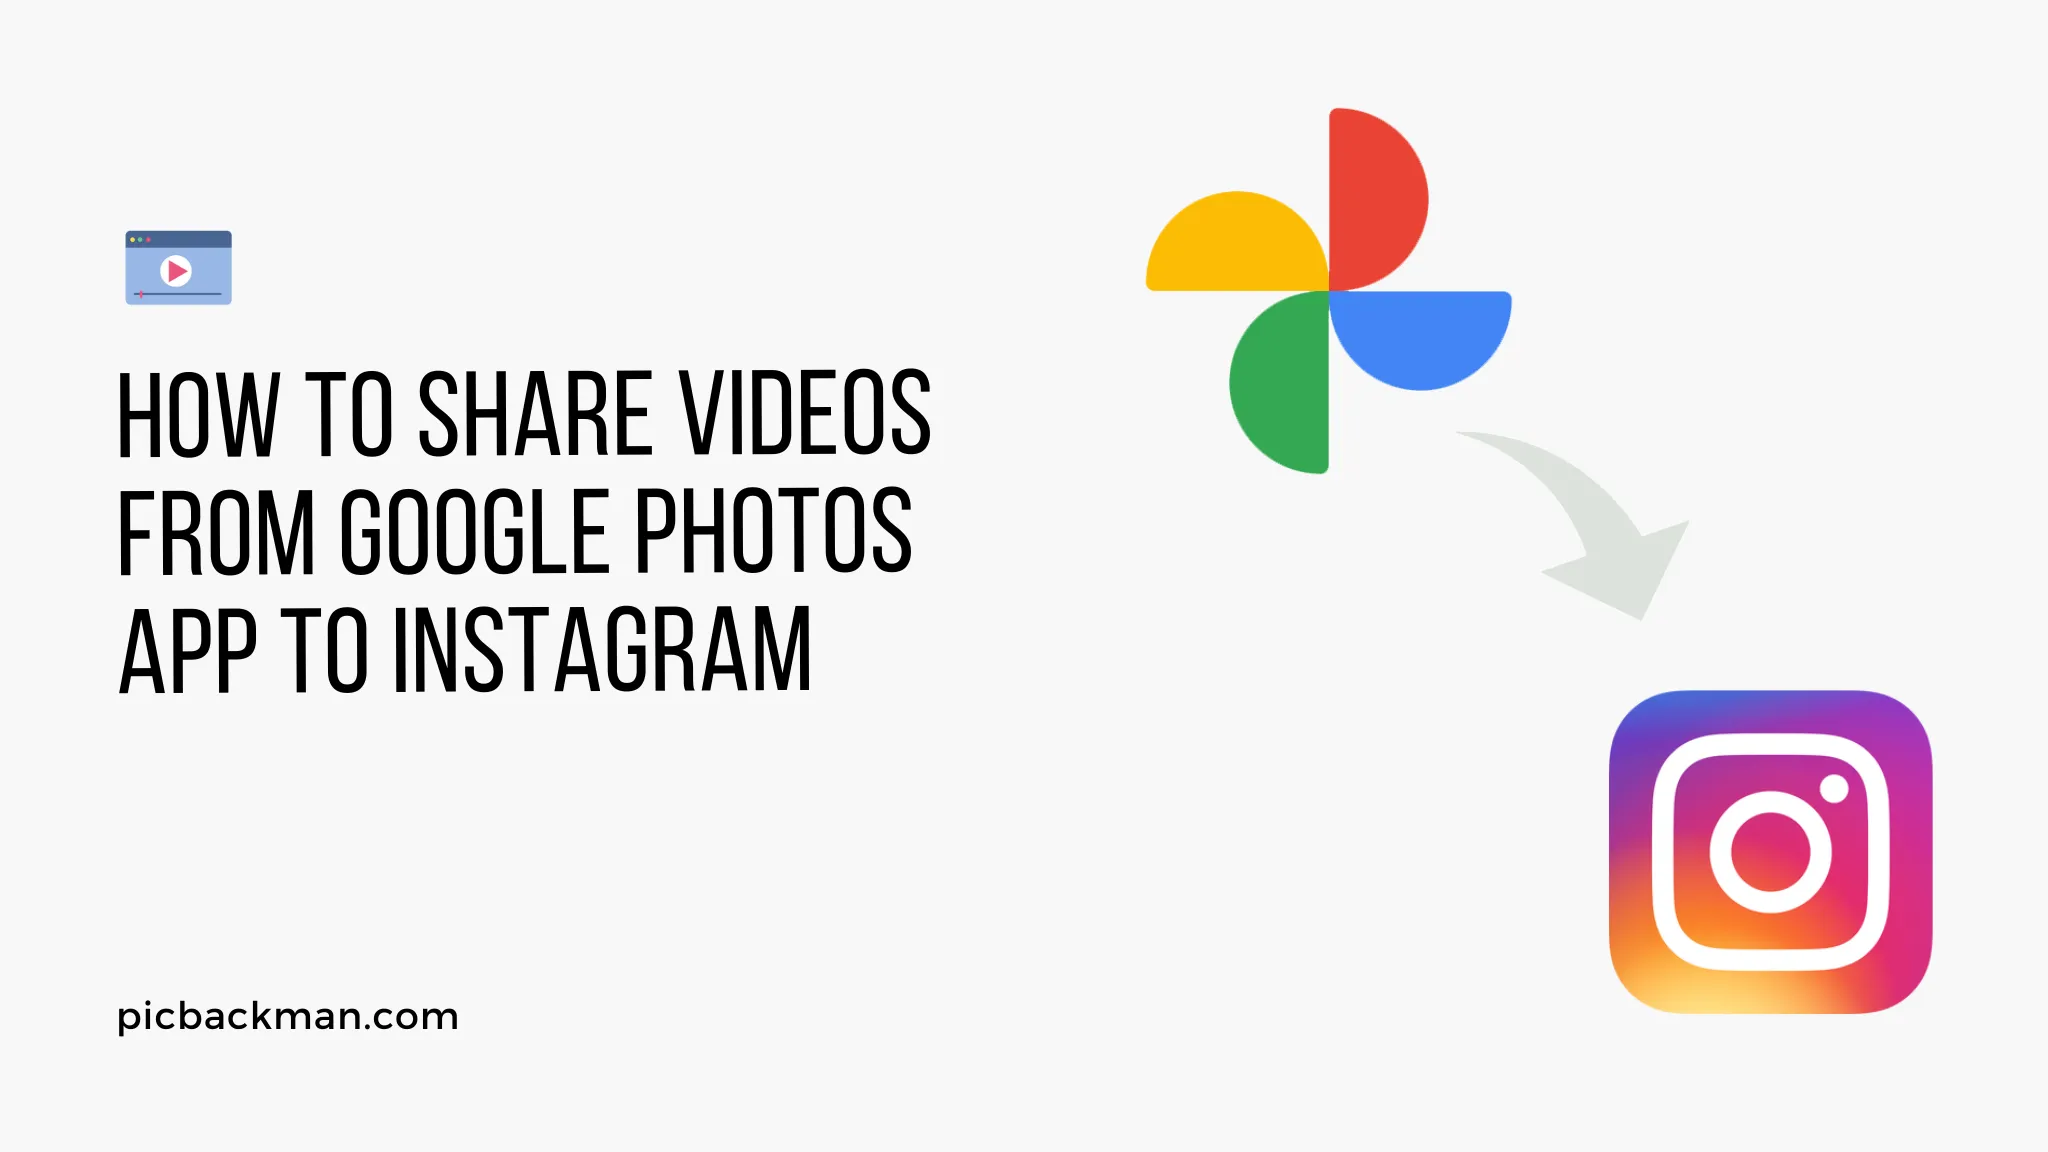 How to Share Videos from Google Photos App to Instagram?